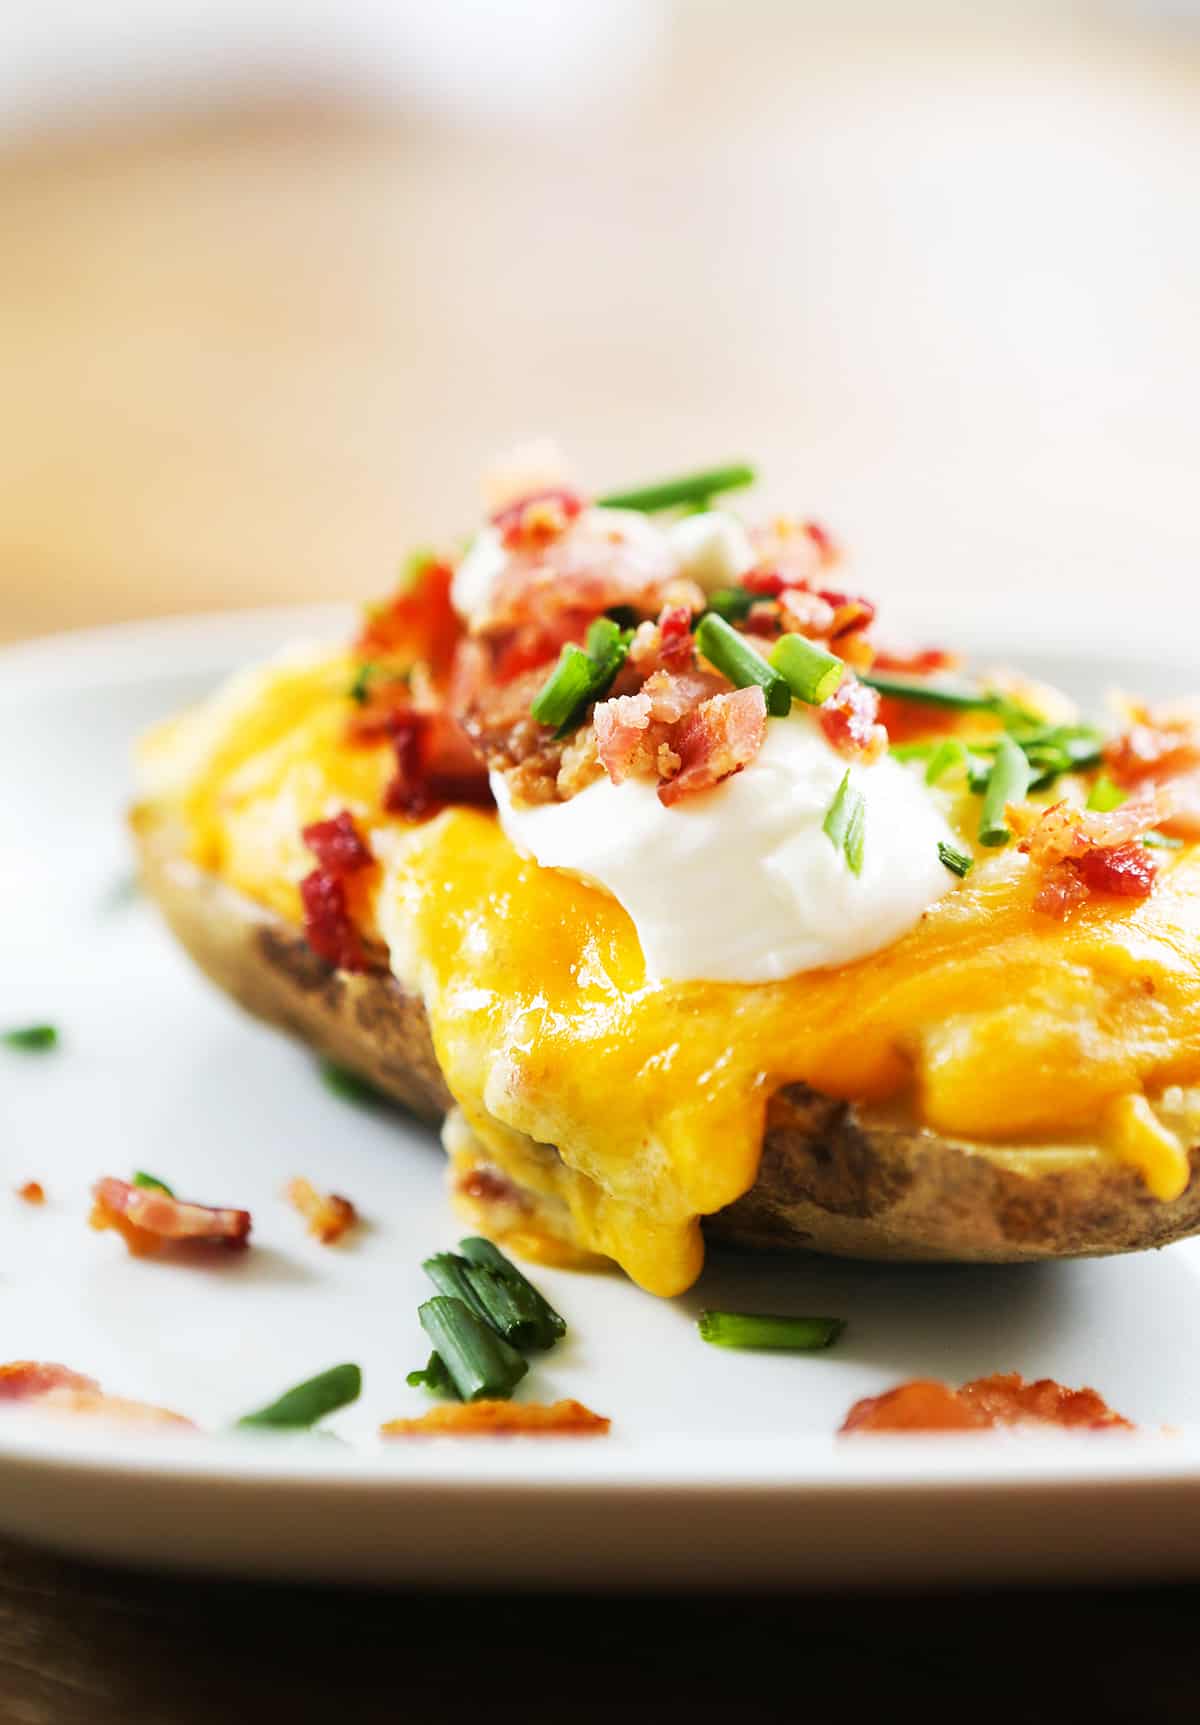 Baked potato loaded up with cheese, sour cream, bacon and chives.